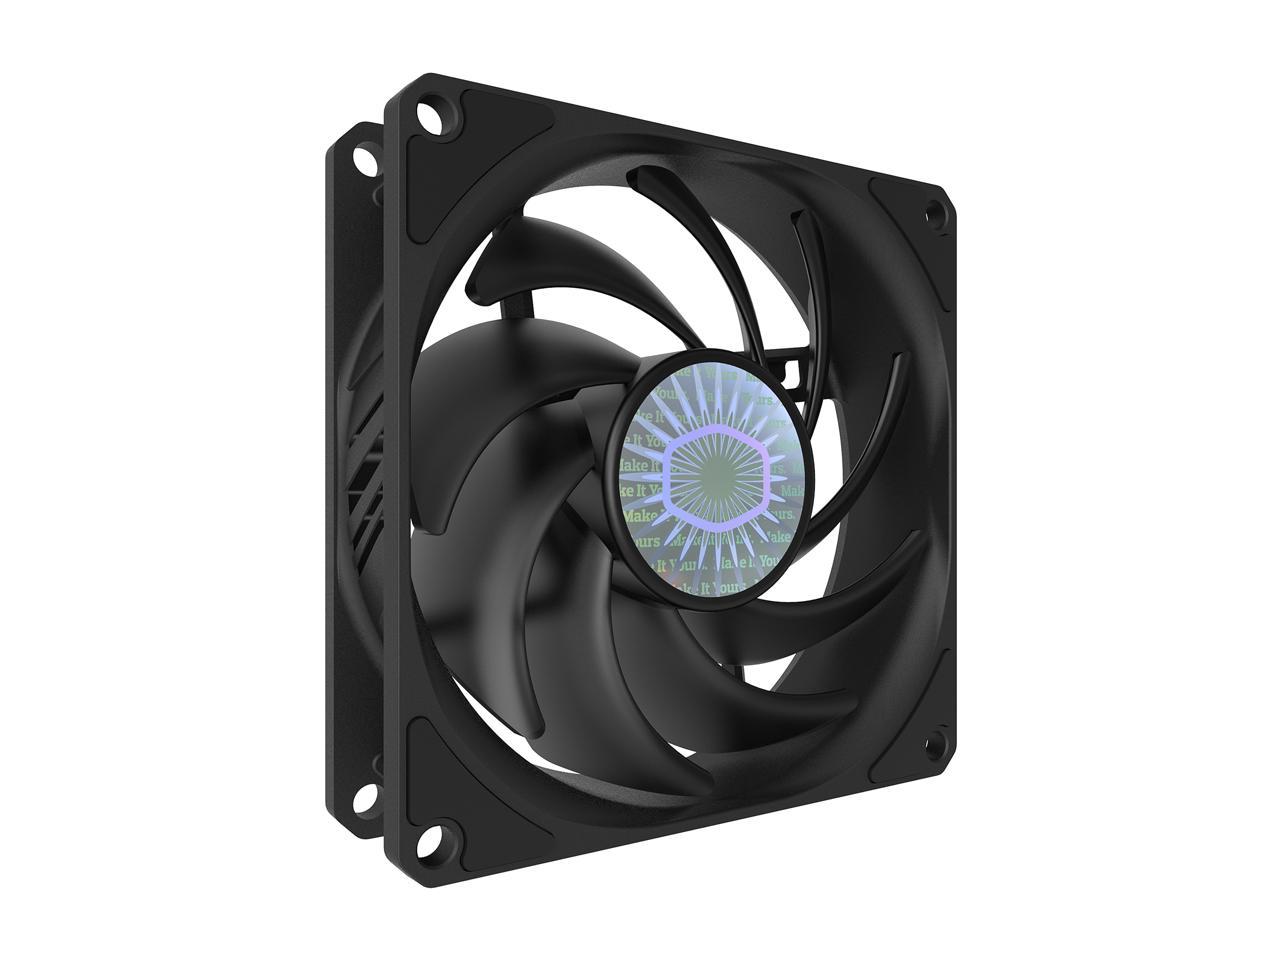 Cooler Master SickleFlow 92 All-Black Square Frame Fan with Air Balance Curve Blade Design, Sealed Bearing, PWM Control for Computer Case & Air Coolers